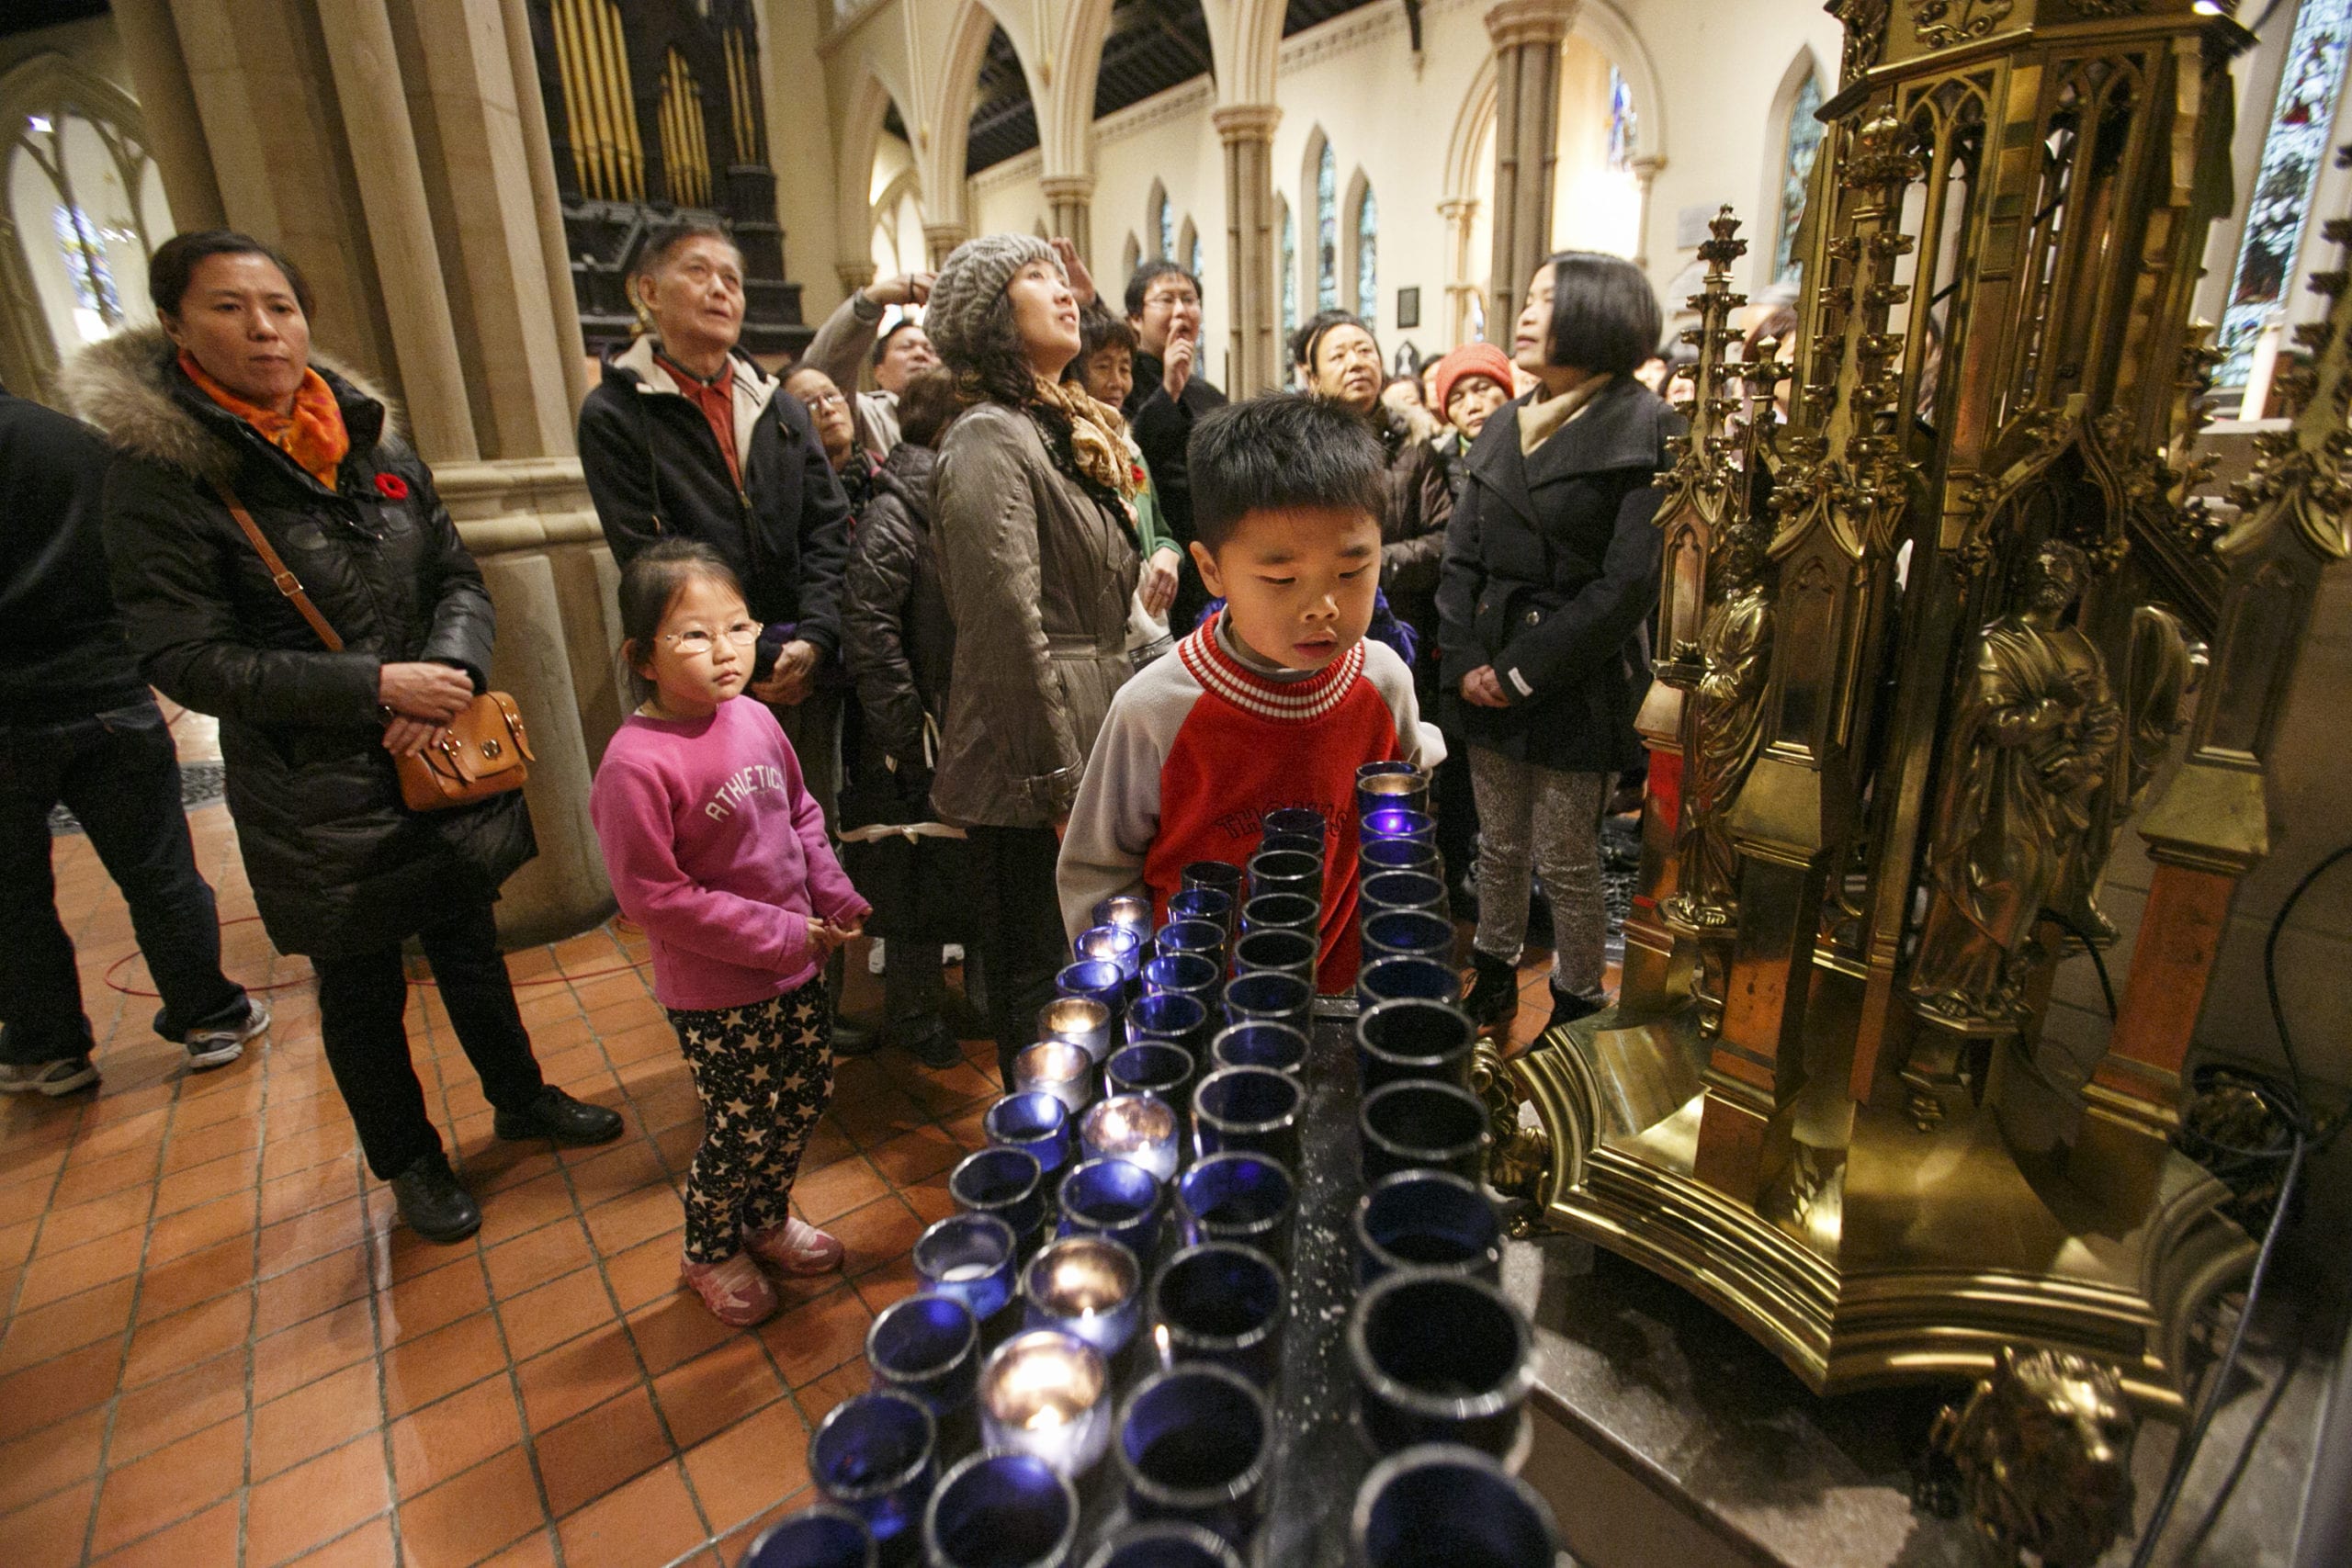 Mandarin ministries hosts Chinese visitors to Cathedral